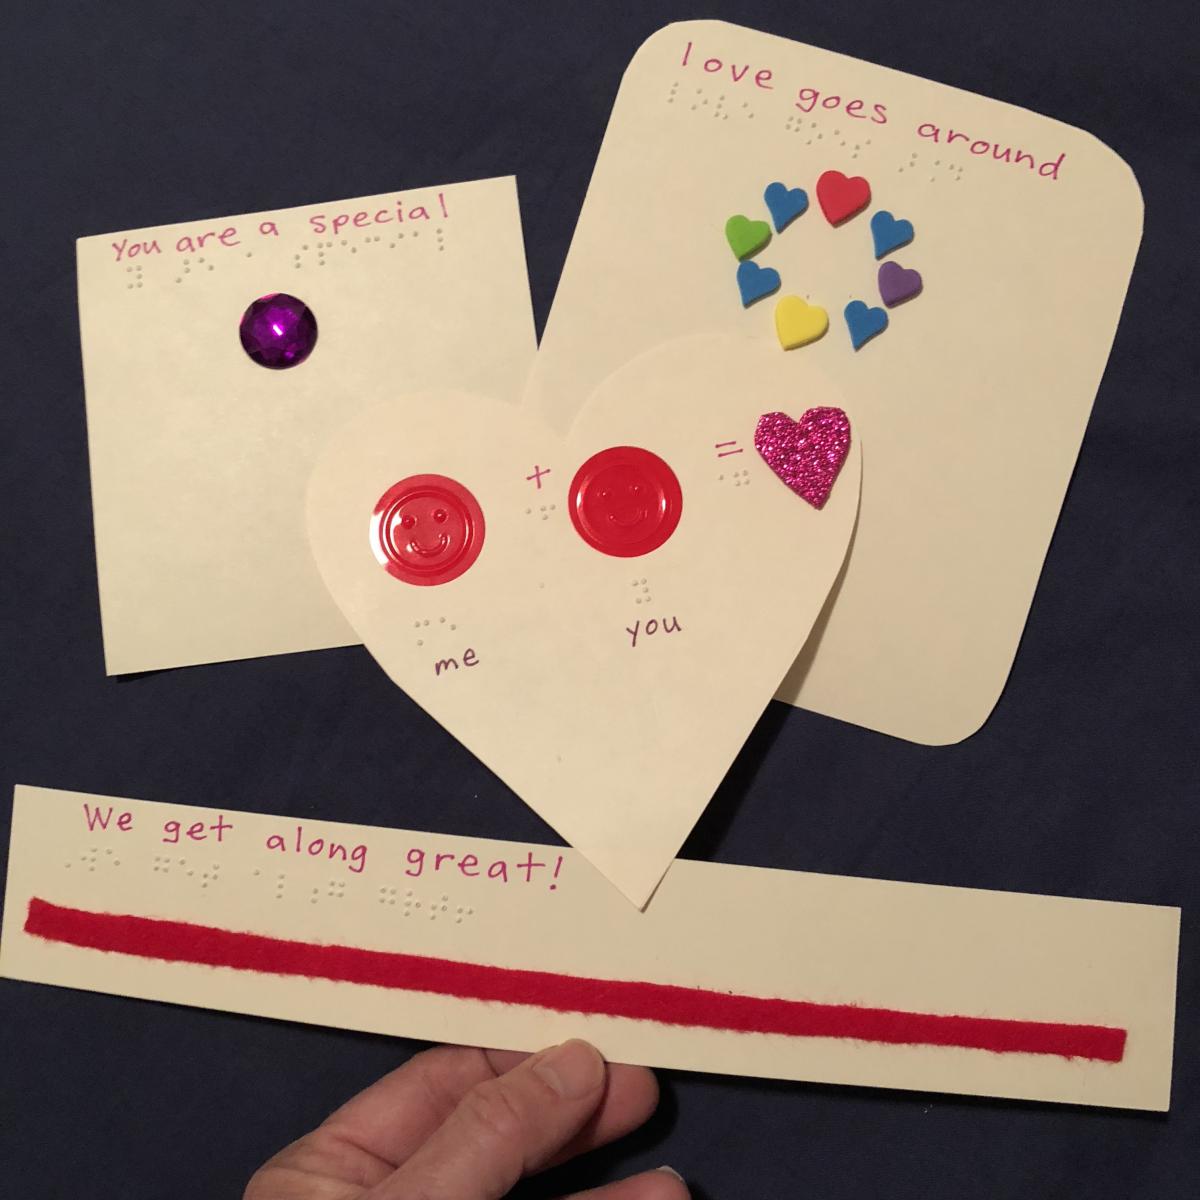 Tactile Valentine cards with braille